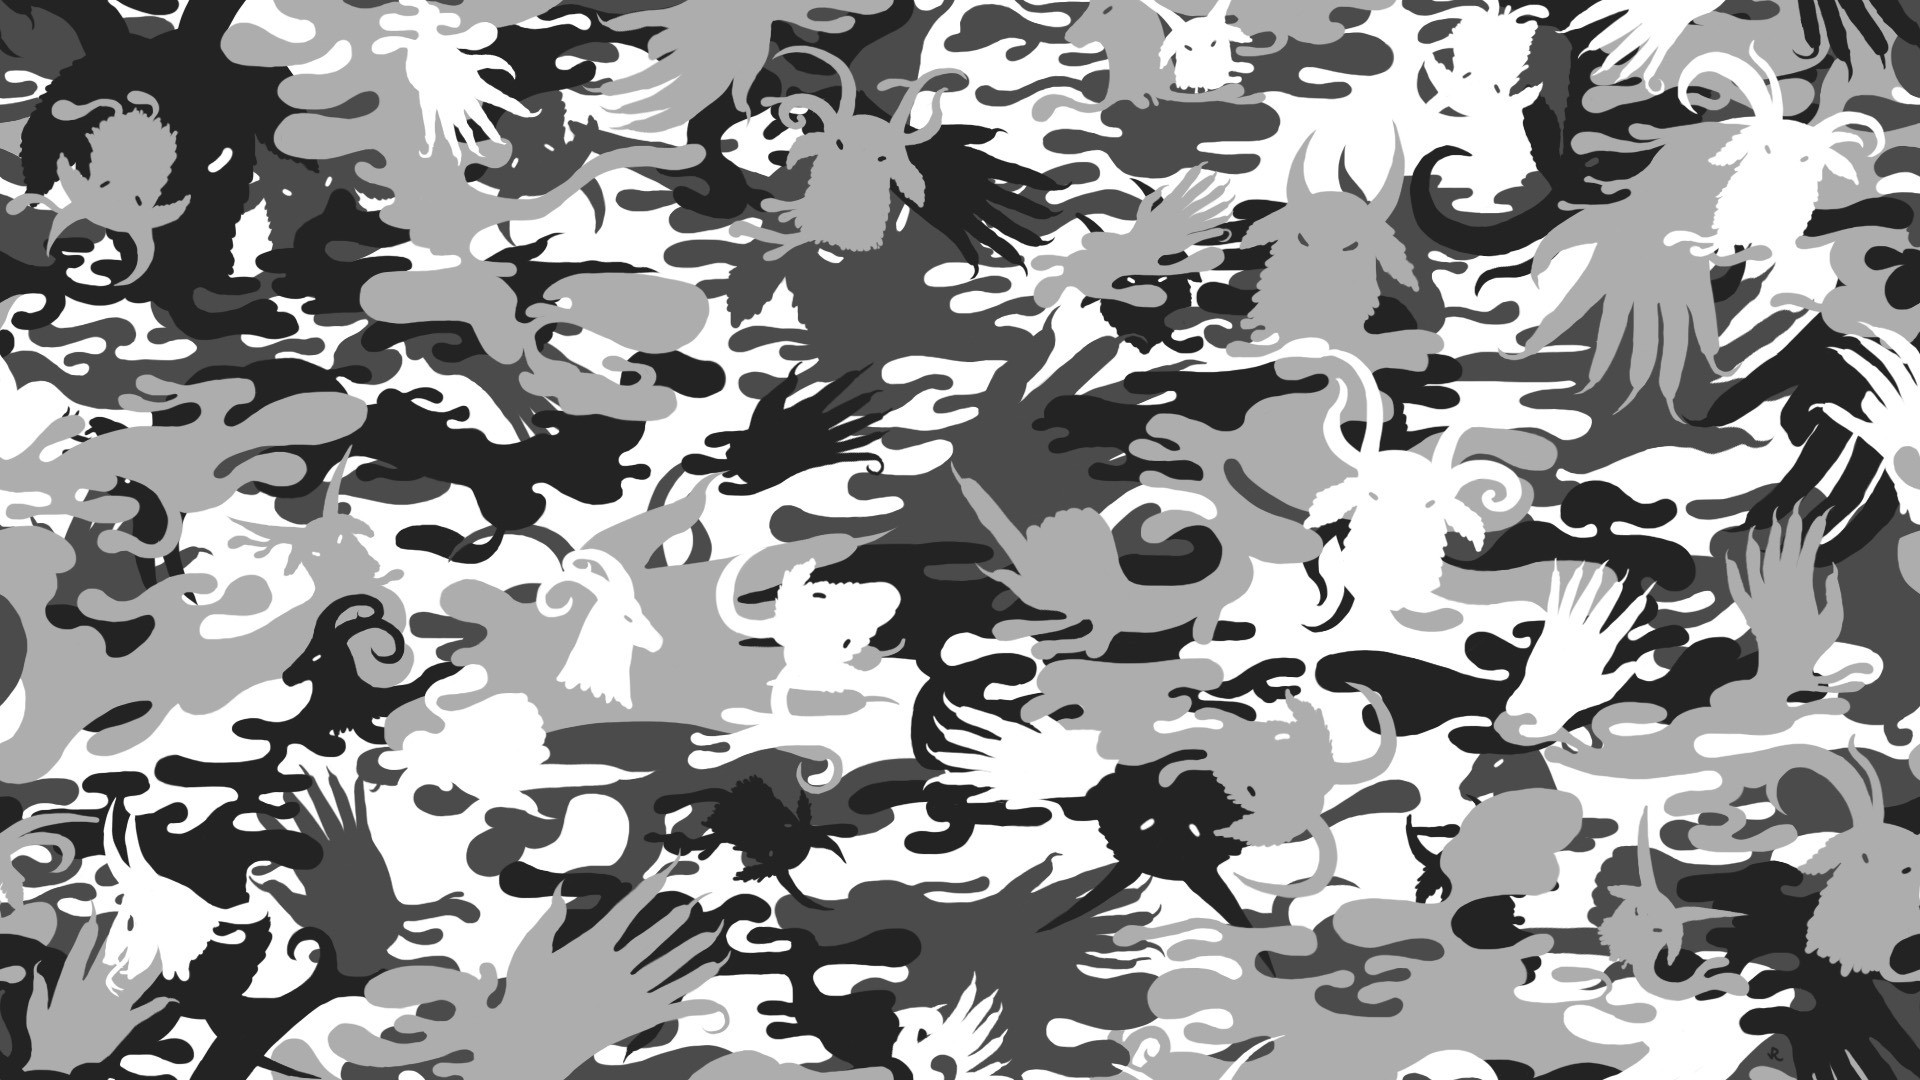 1920x1080 War Black And White Urban Camouflage Seamless Vector Pattern .